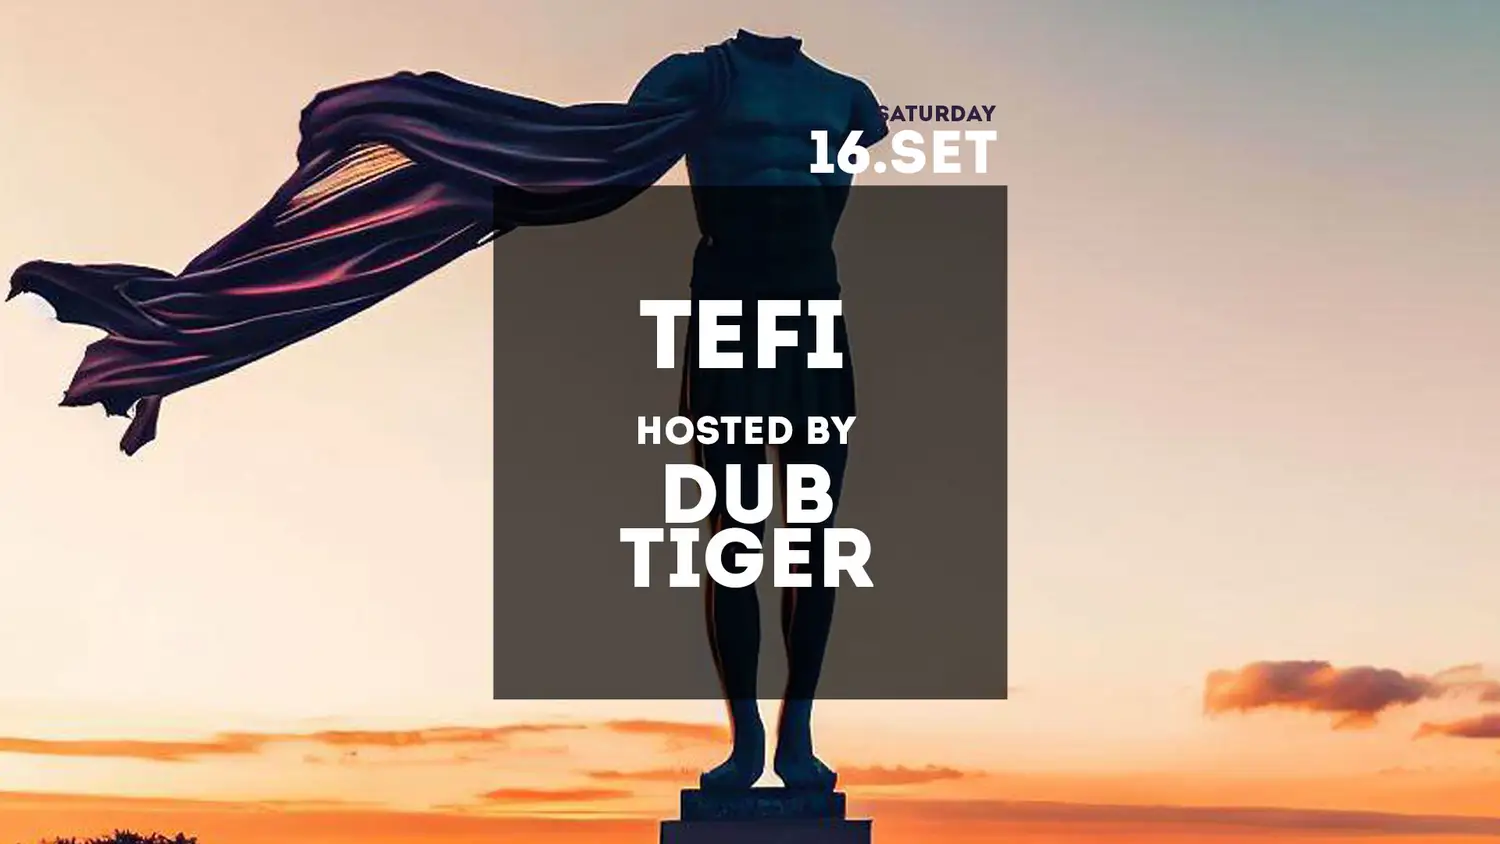 TEFI - Hosted by Dub Tiger